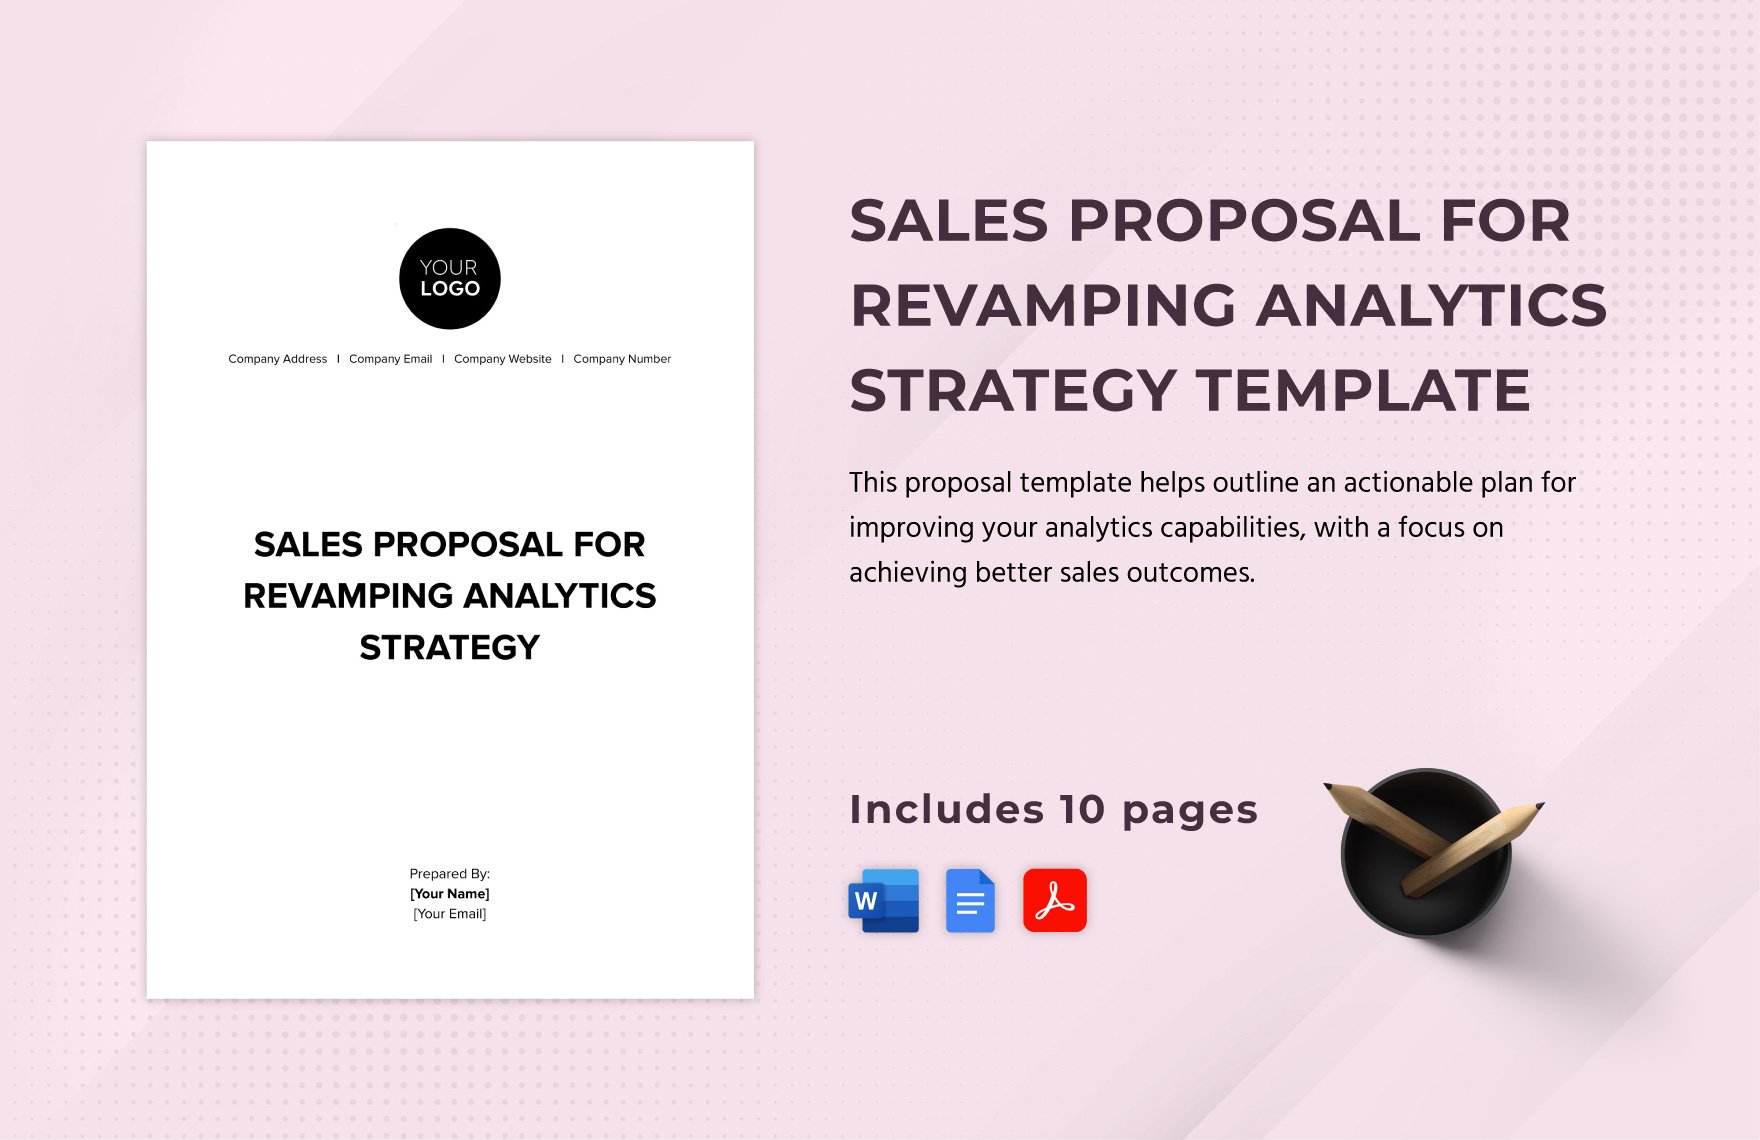 Sales Proposal for Revamping Analytics Strategy Template in Word, Google Docs, PDF